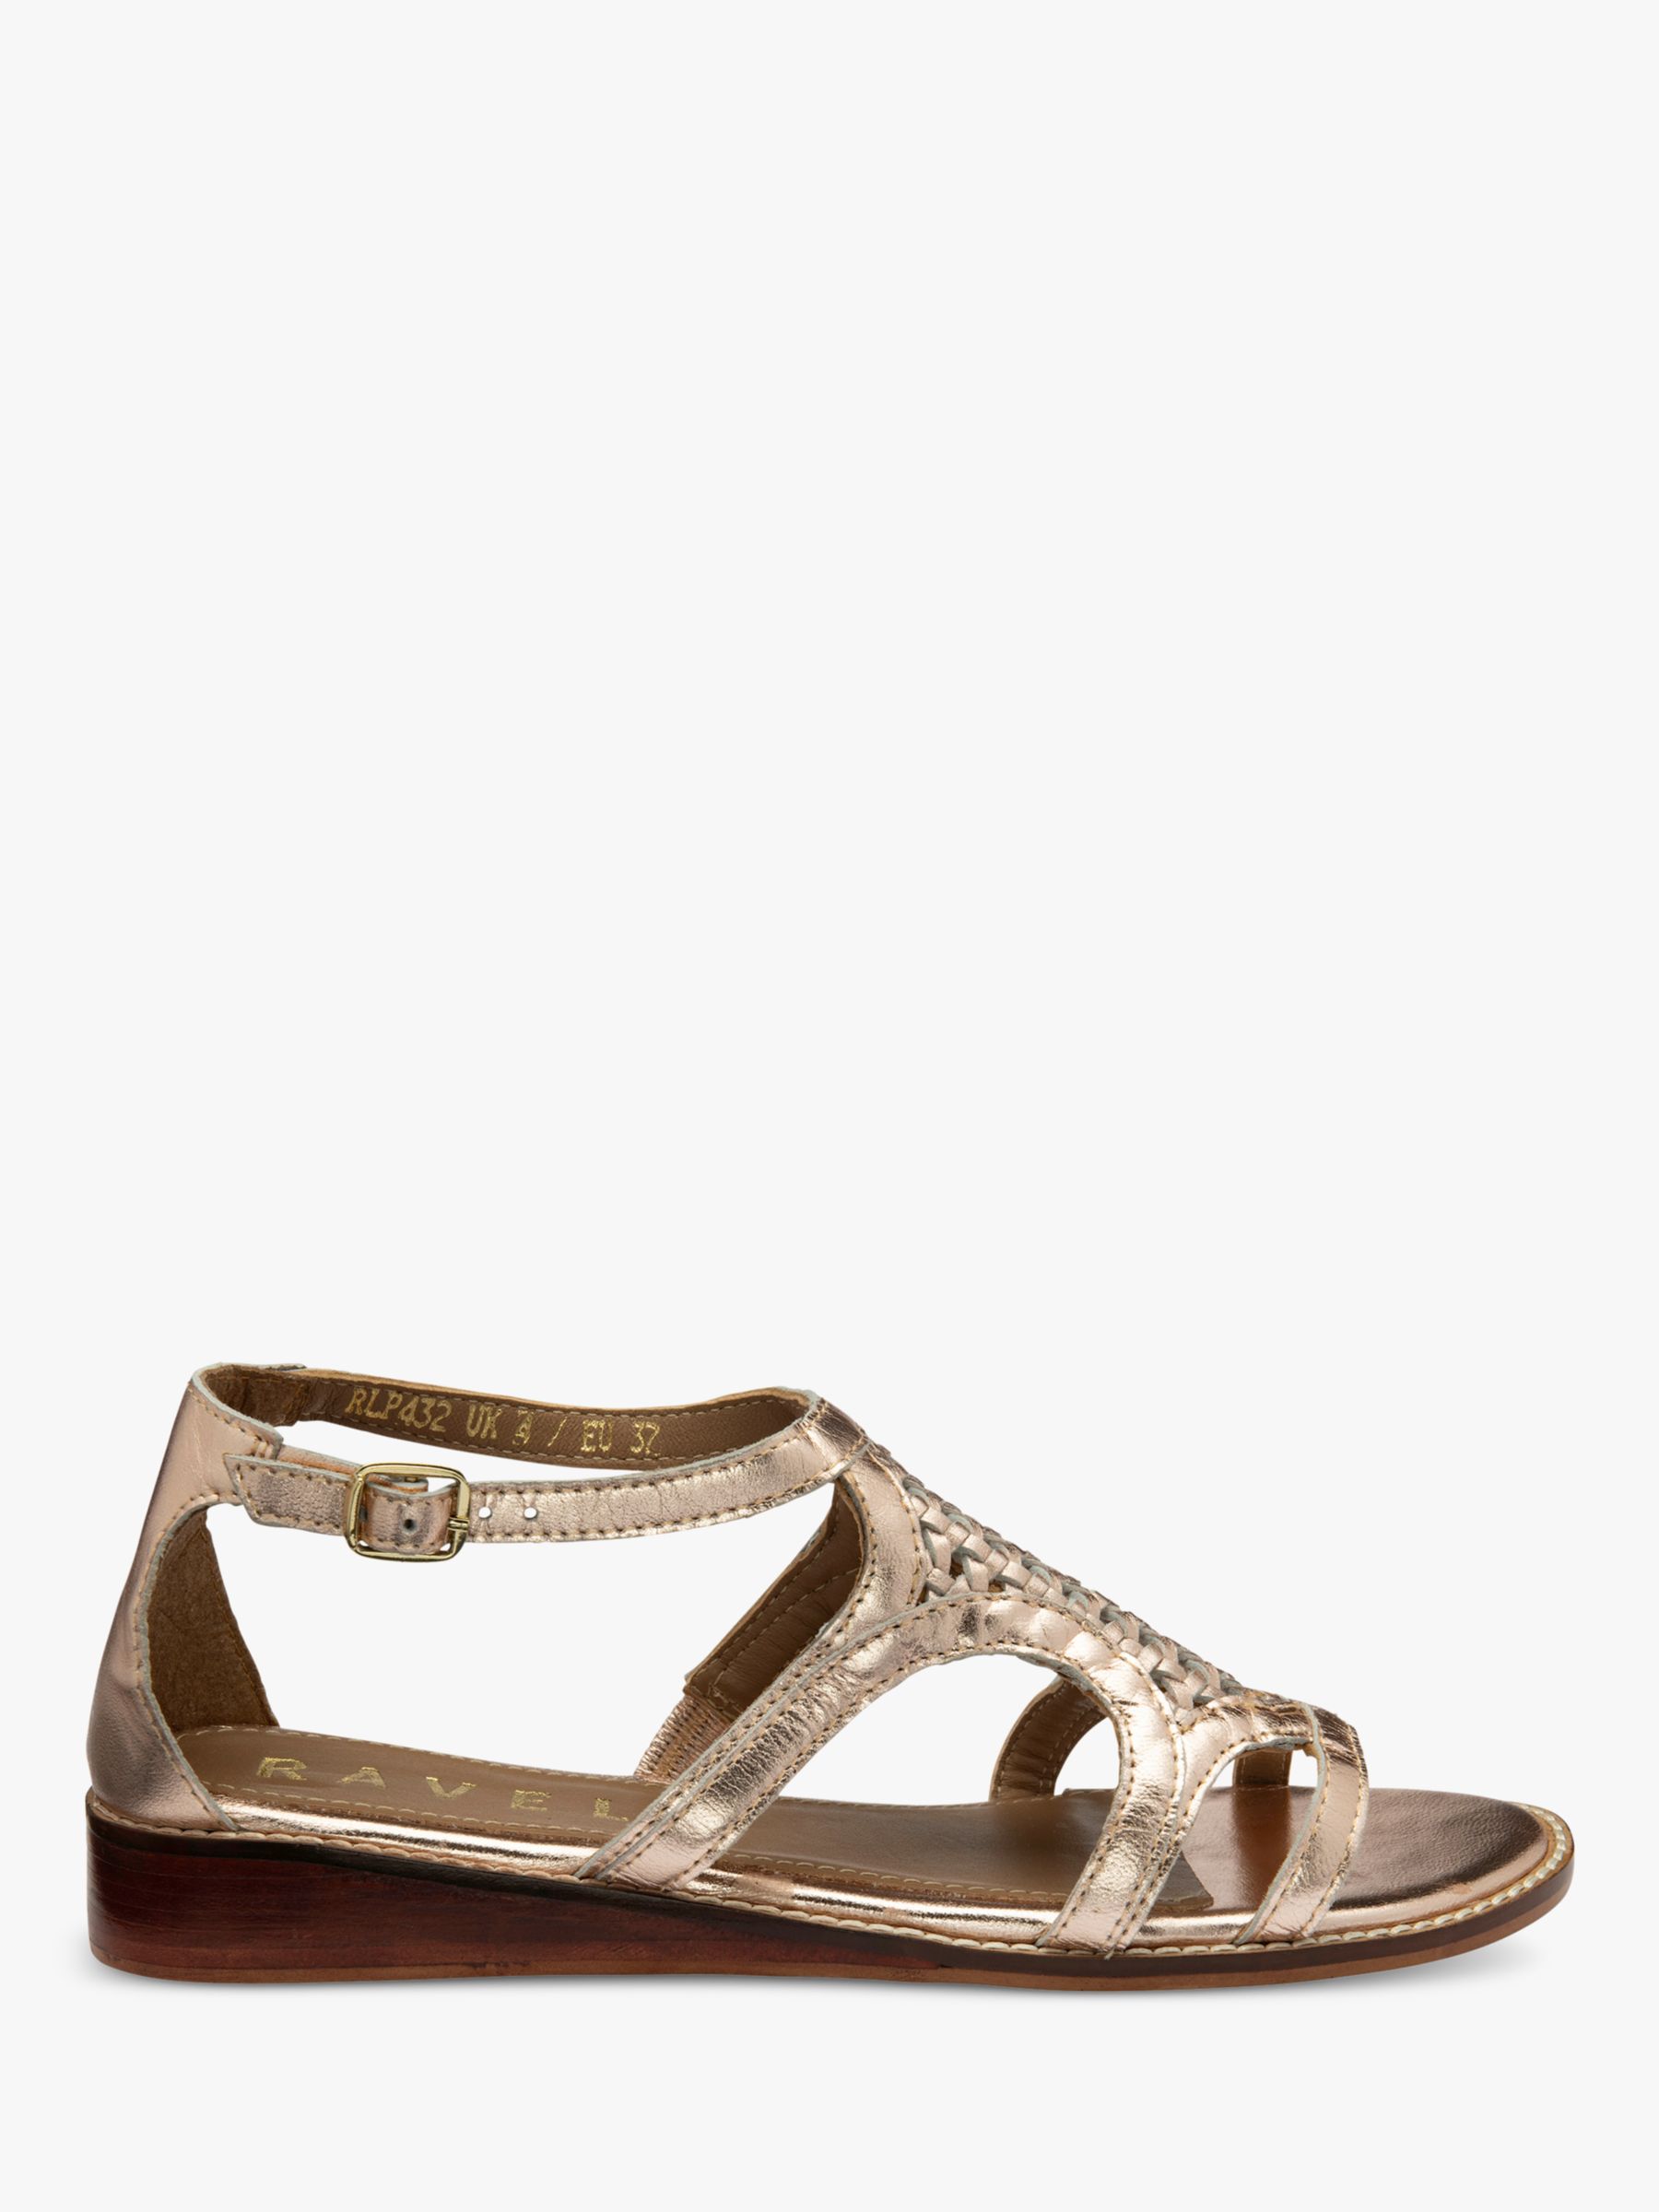 Ravel Cardwell Leather Sandals, Gold at John Lewis & Partners